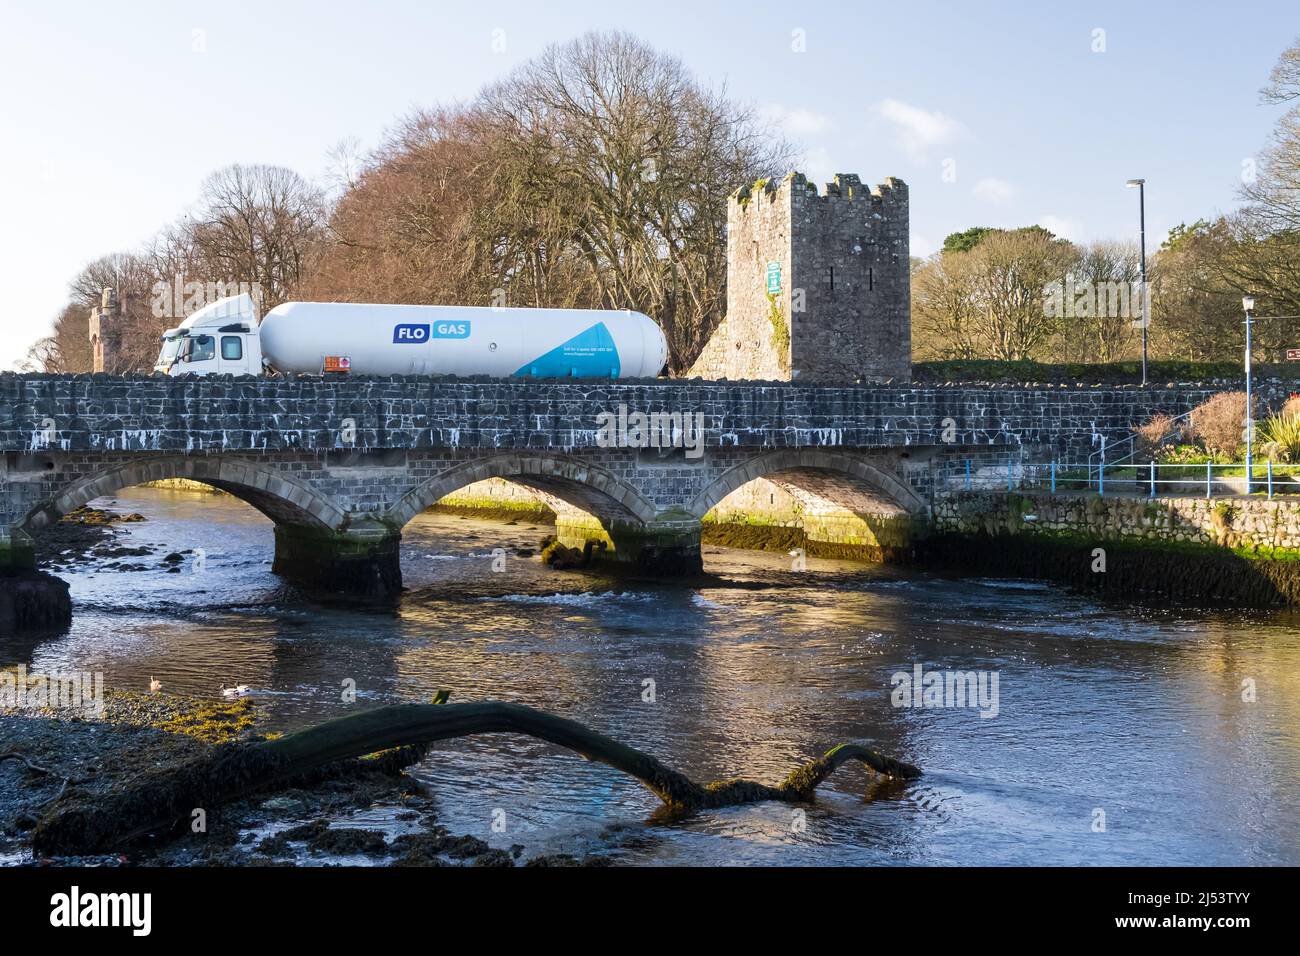 White Flo Gas truck drives across the bridge over the river at the entrance to the historic County Antrim village of Glenarm in Northern Ireland. Stock Photo